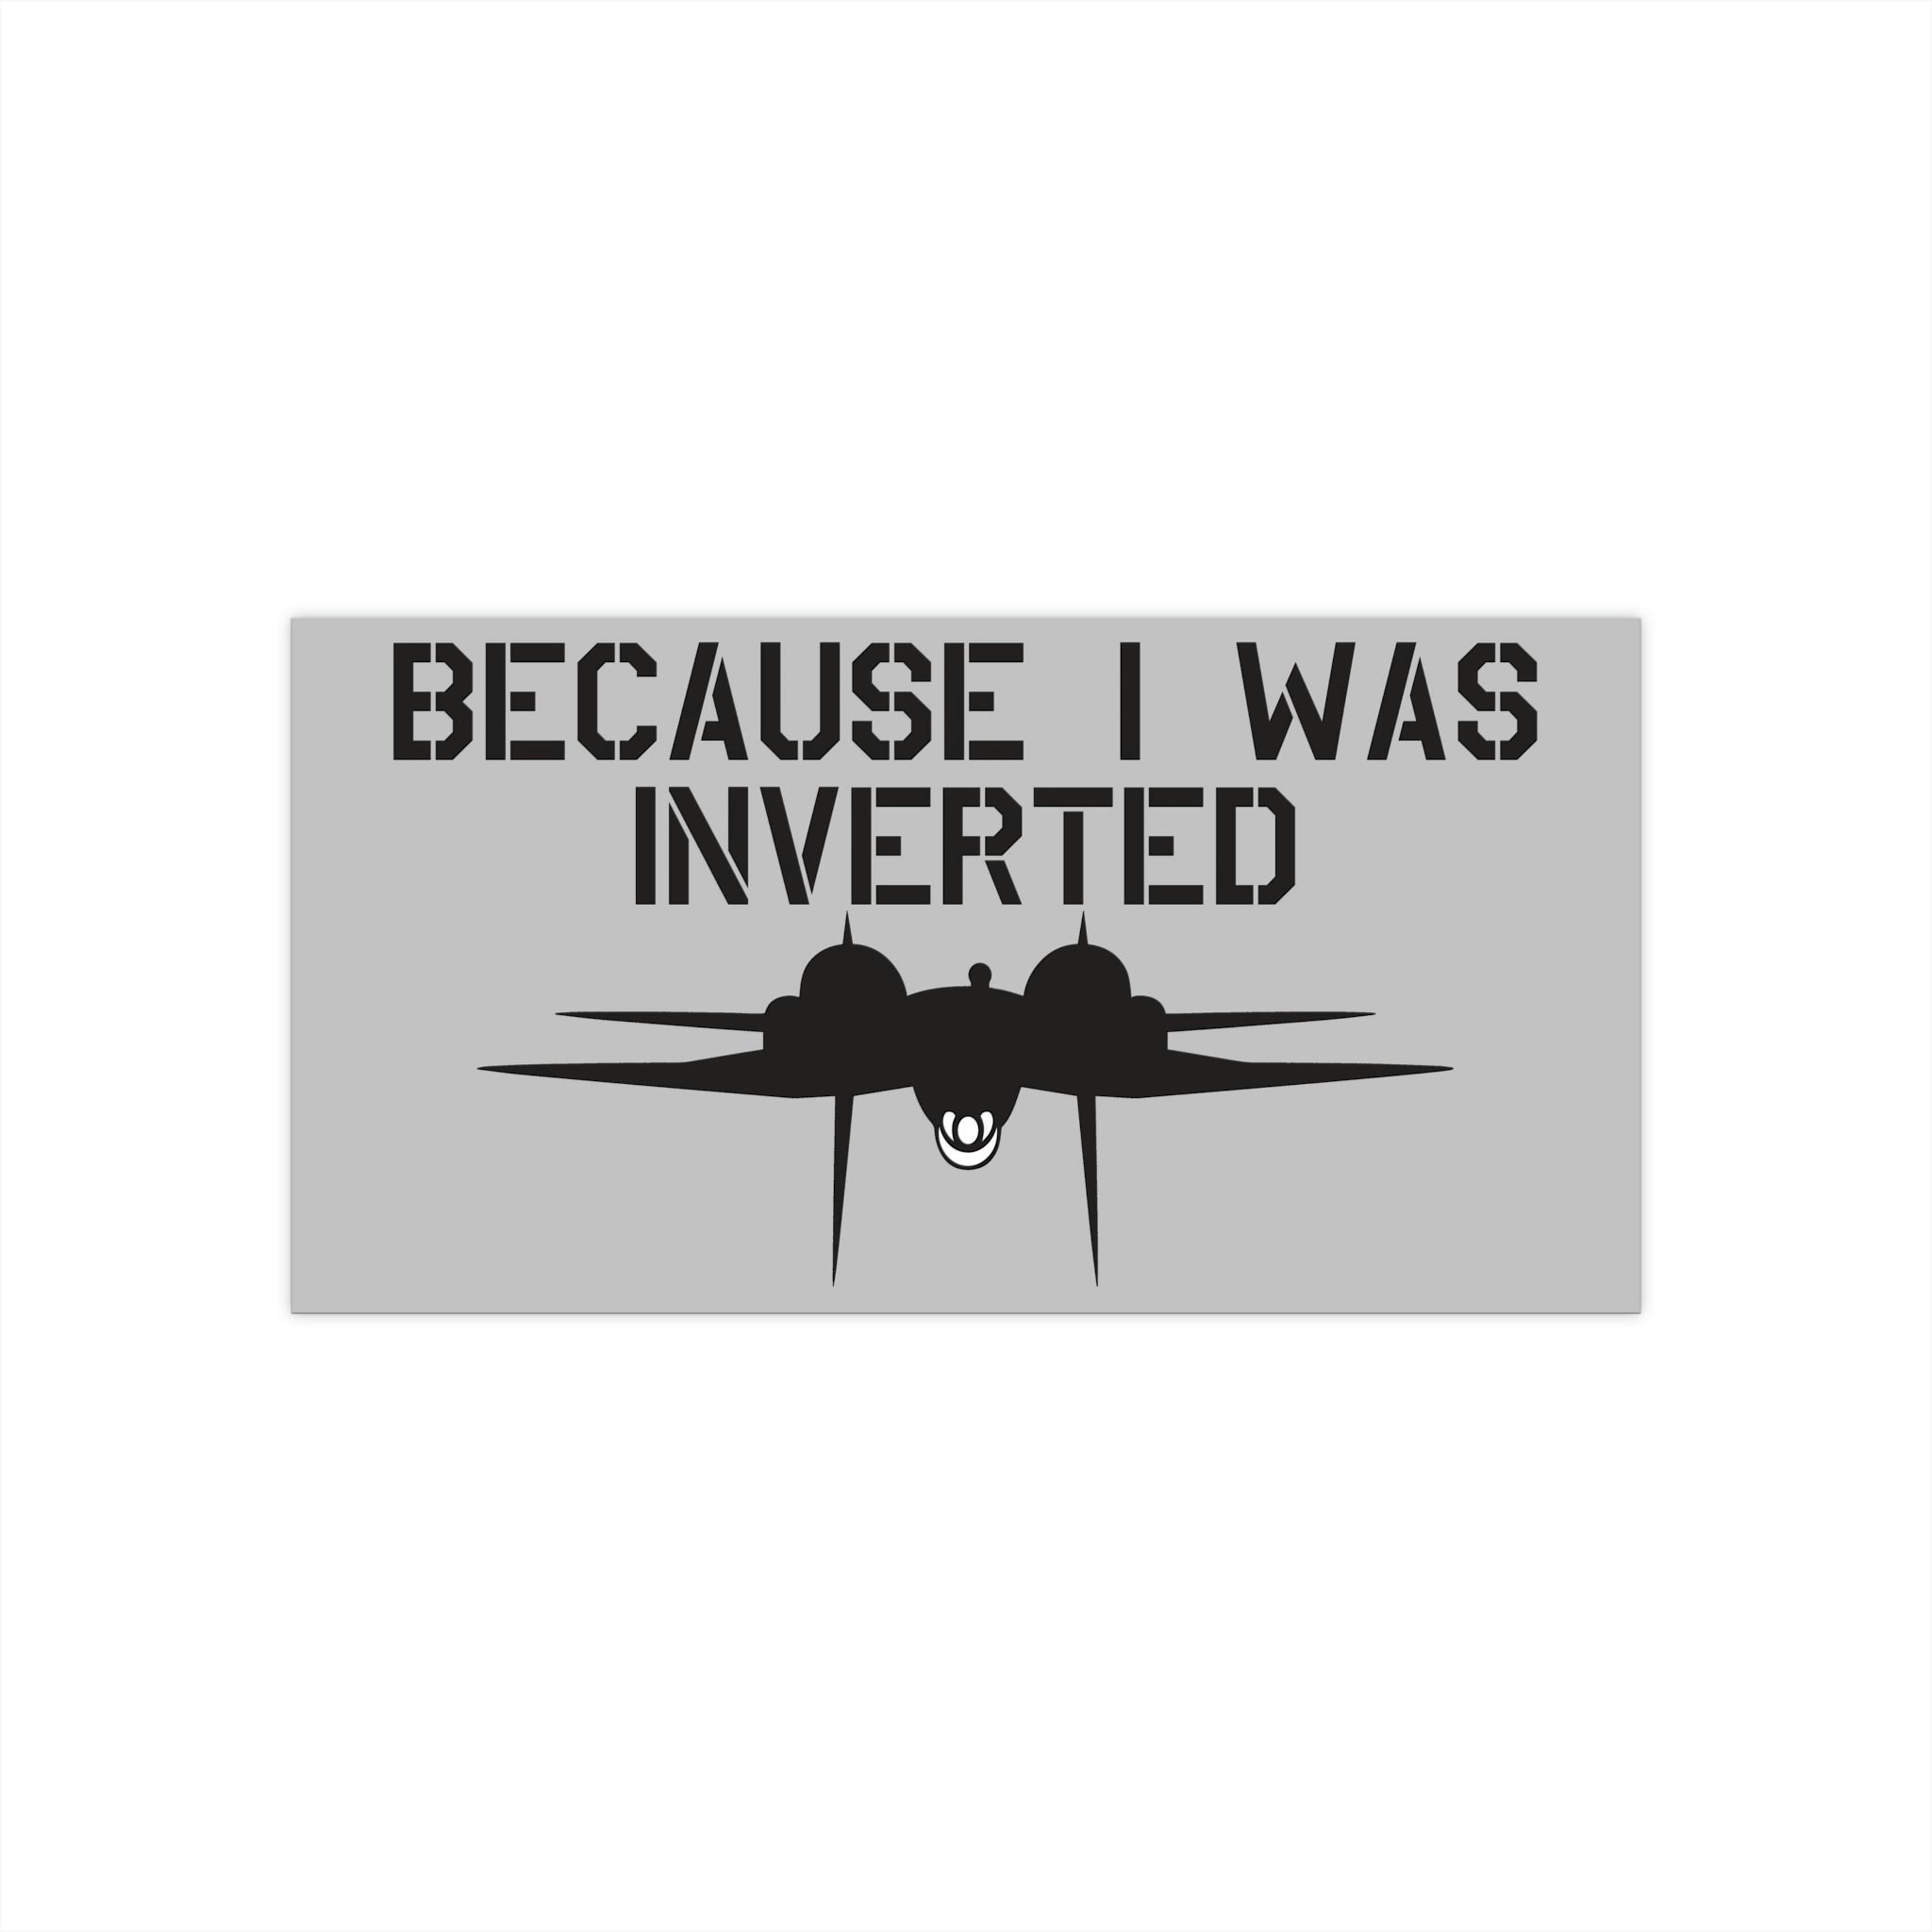 "Becuase I was inverted" Bumper Stickers - I Love a Hangar